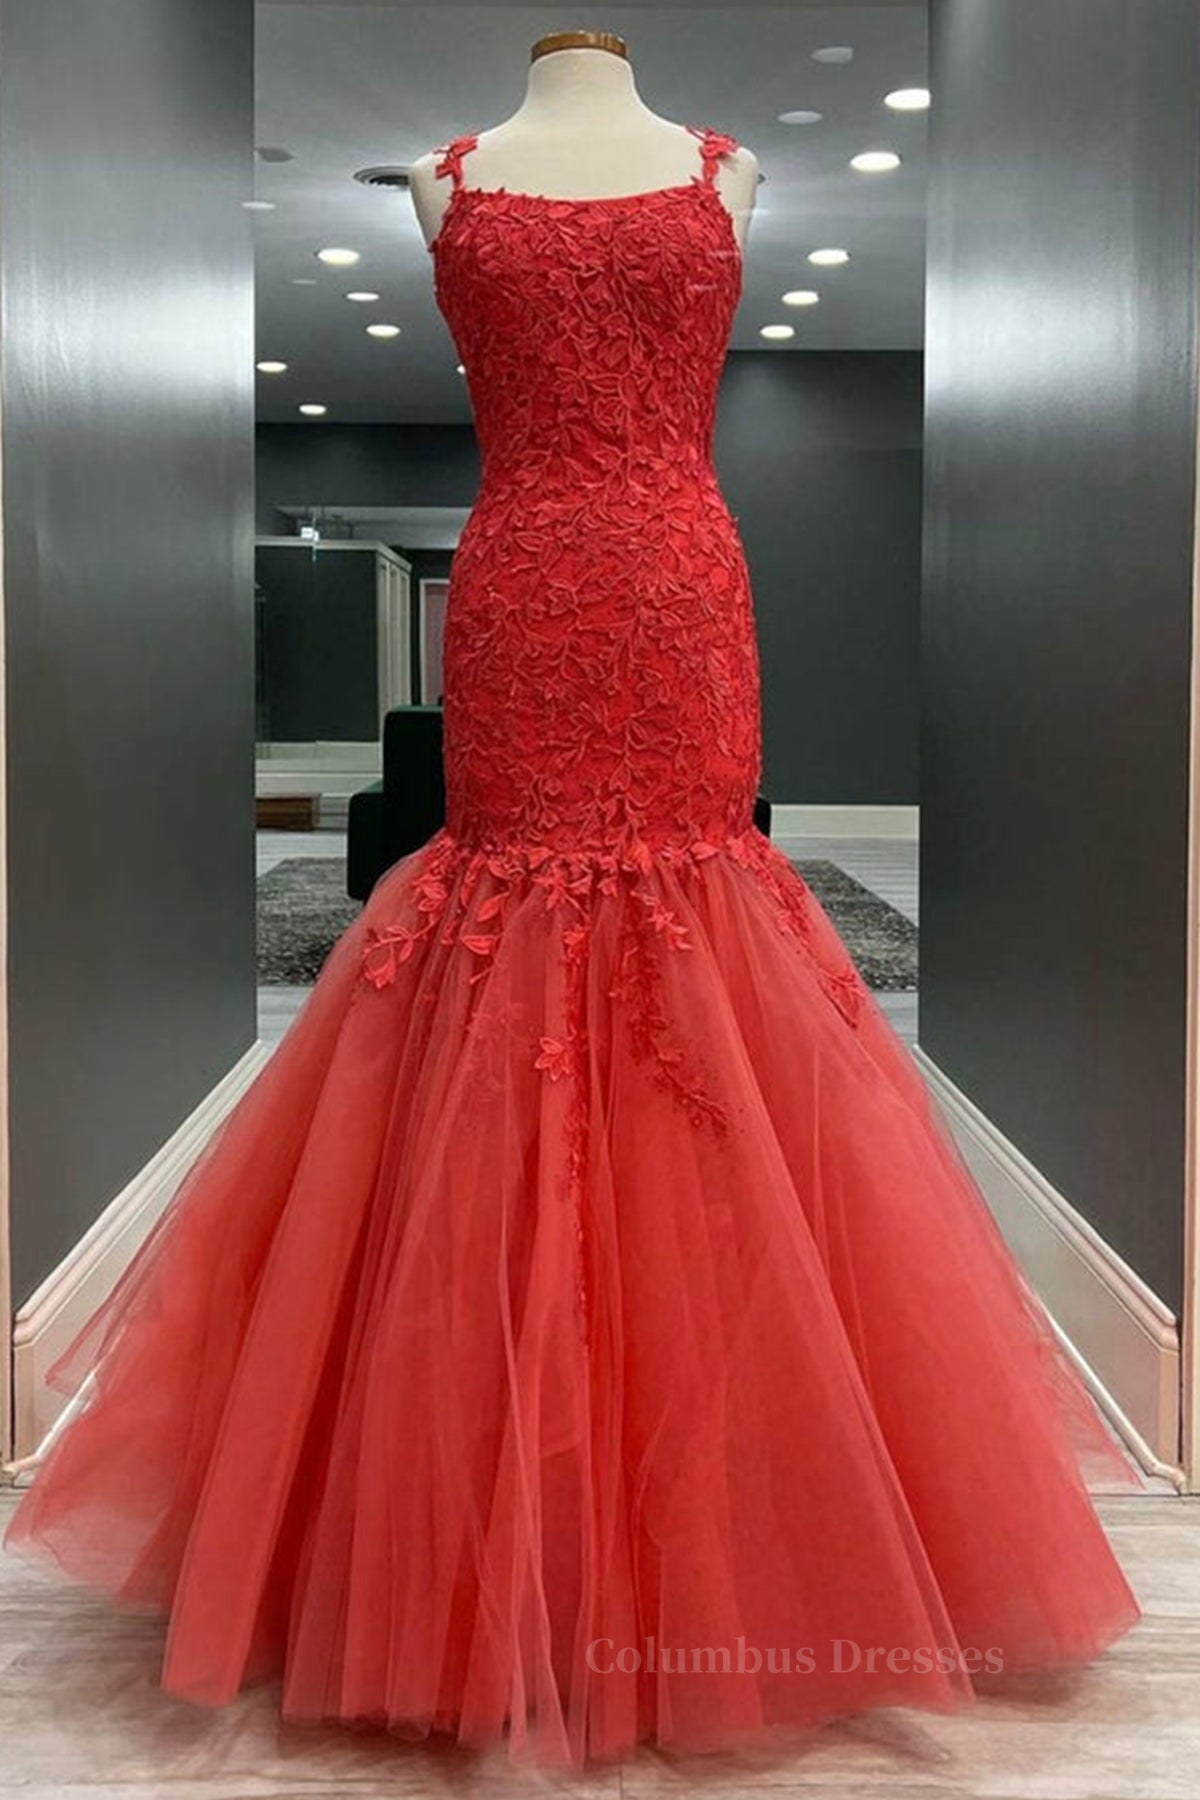 Evening Dress Gold, Mermaid Red Tulle Lace Long Prom Dresses, Mermaid Red Formal Dresses, Red Lace Evening Dresses